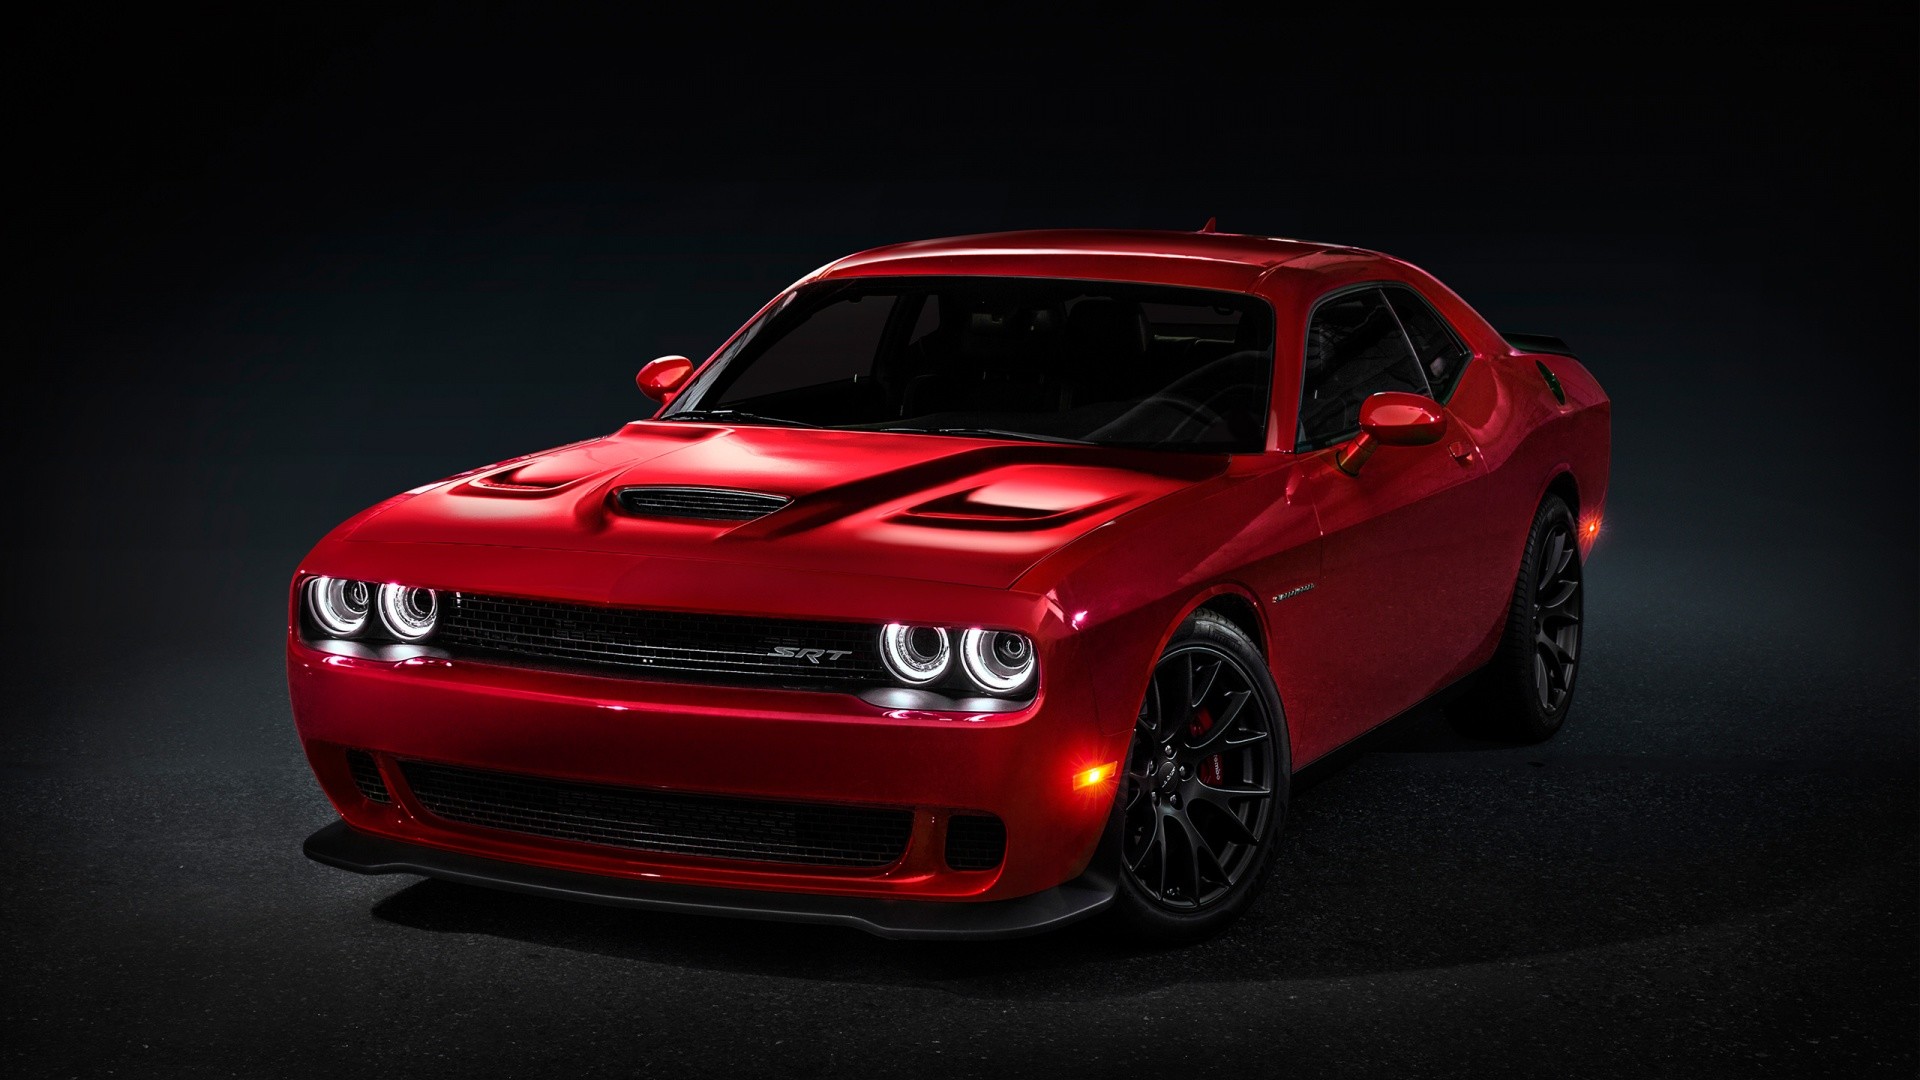 1920x1080 full hd wallpaper dodge challenger red front view muscle